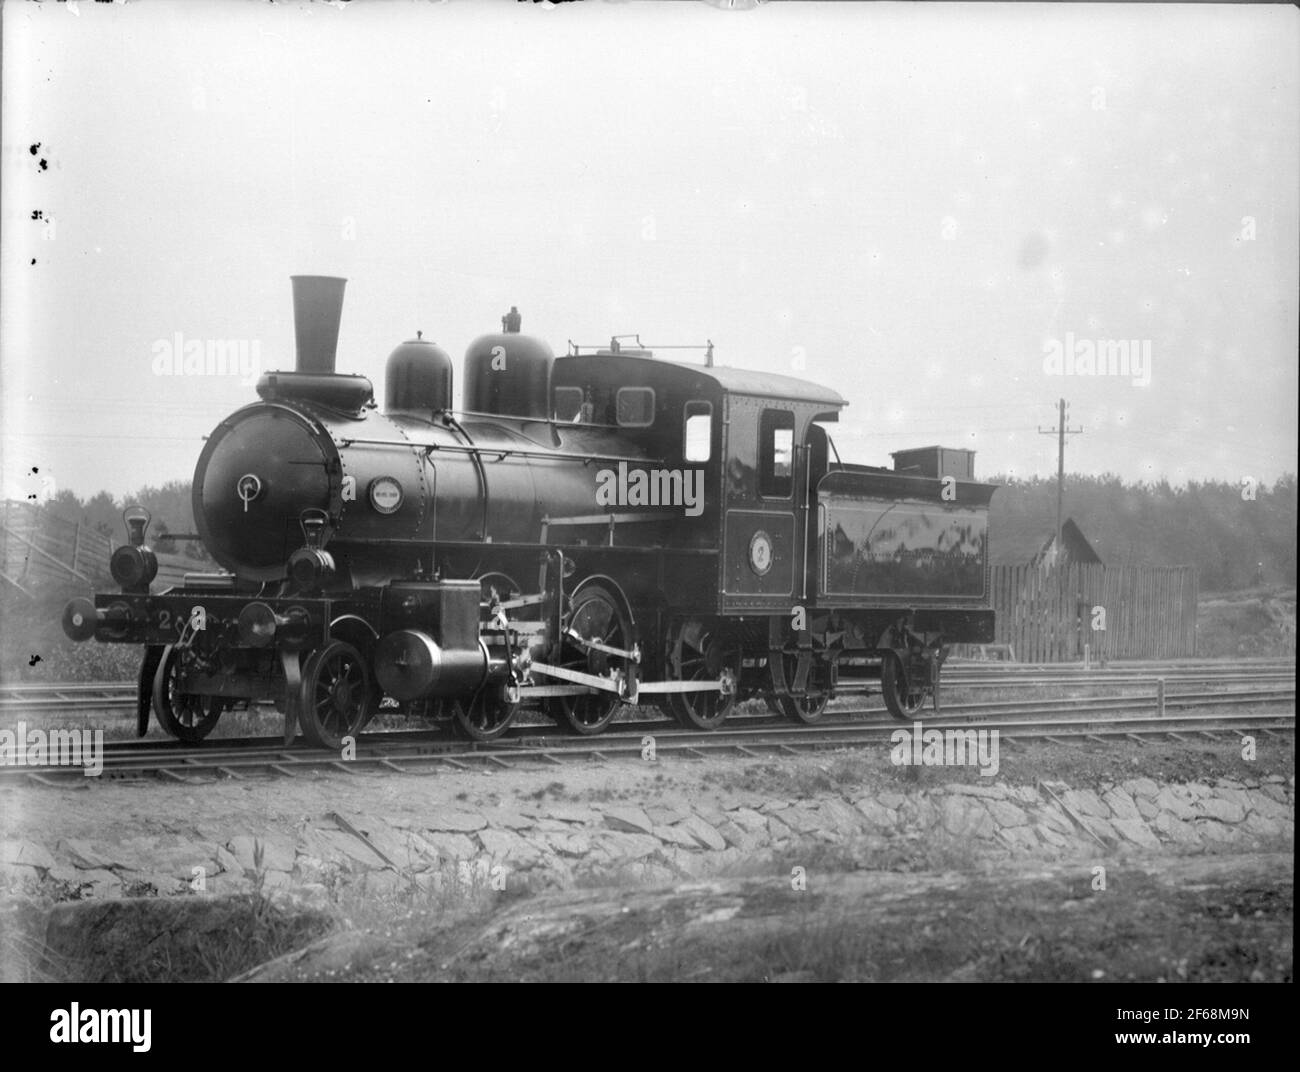 Delivery photo of DHDJ Lok 2, was supplied by Nydqvist & Holm AB 1898 for  Dala - Hälsingland rail. Was heavily remodeled in 1910. The boiler was  equipped with superheater, cylinder and